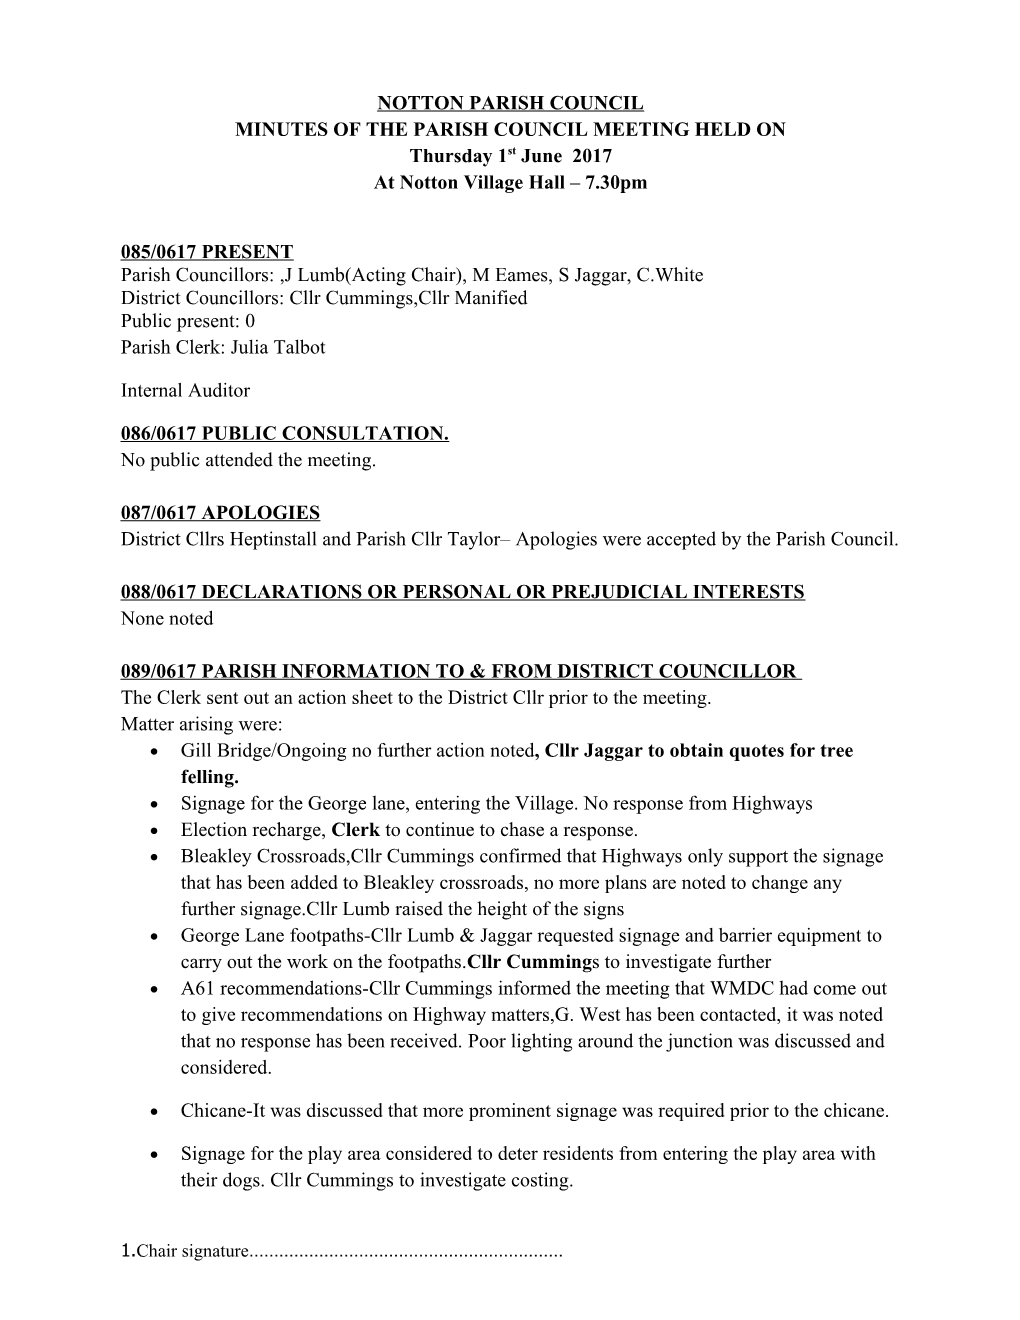 Minutes of the Parish Council Meeting Held On